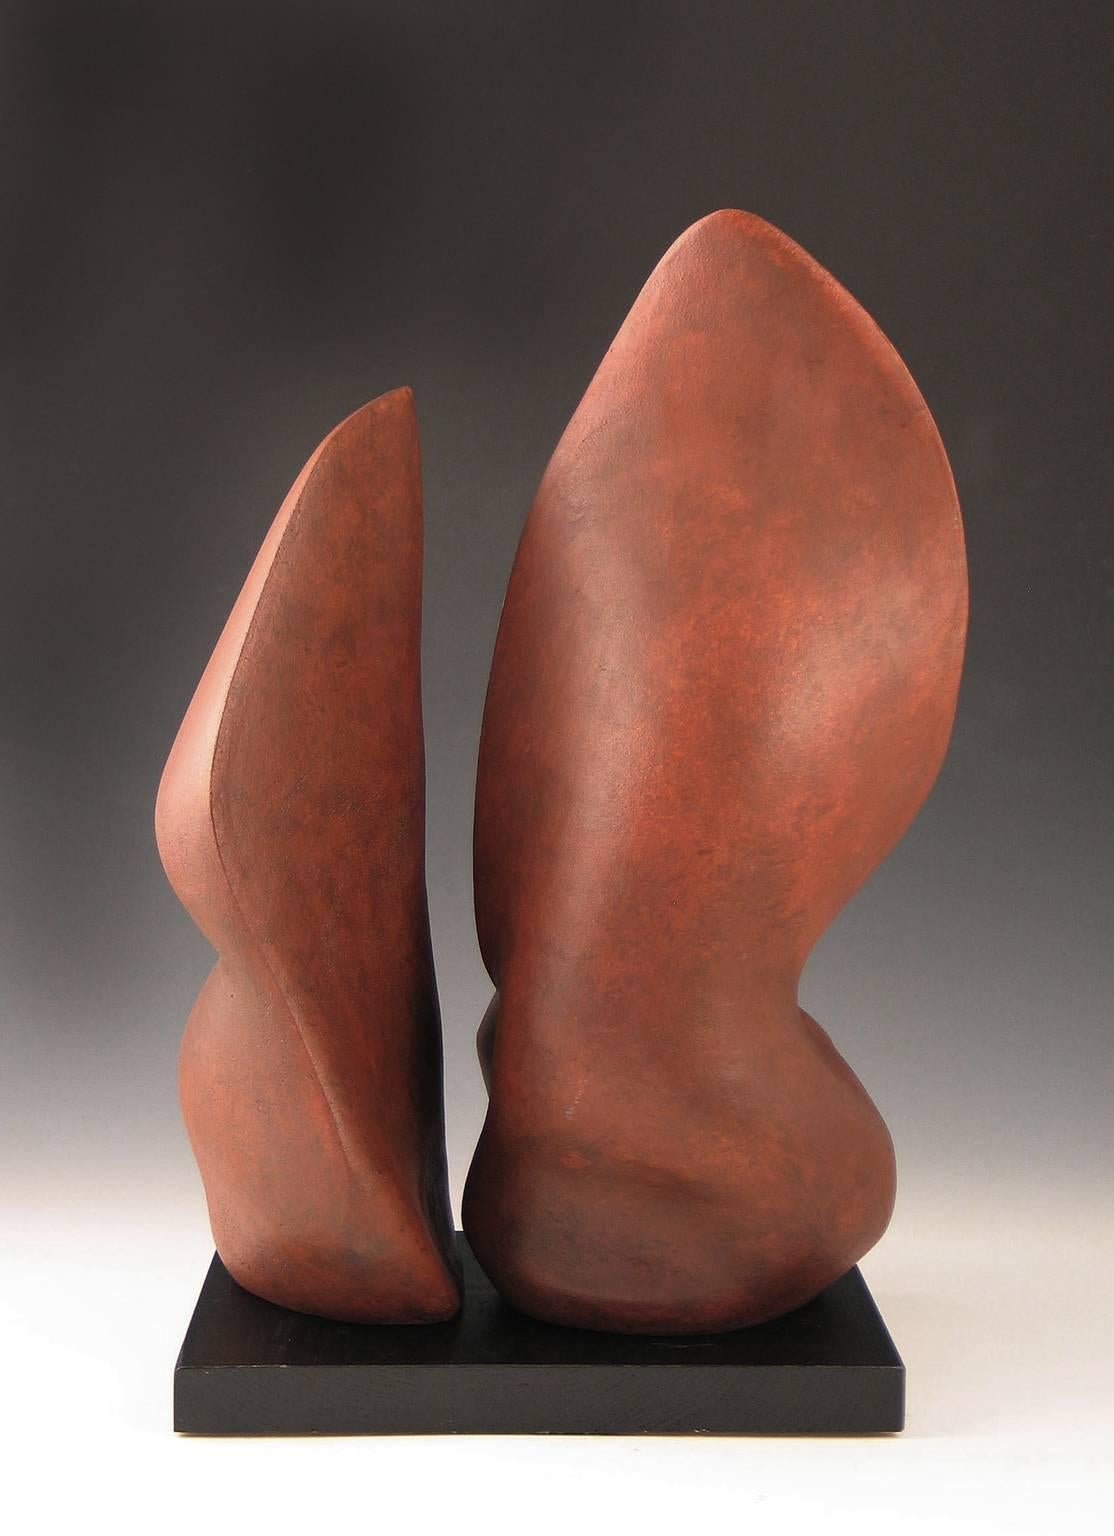 “Divided”, earthen red ceramic, inspired by the American Southwest - Sculpture by Elaine Lorenz